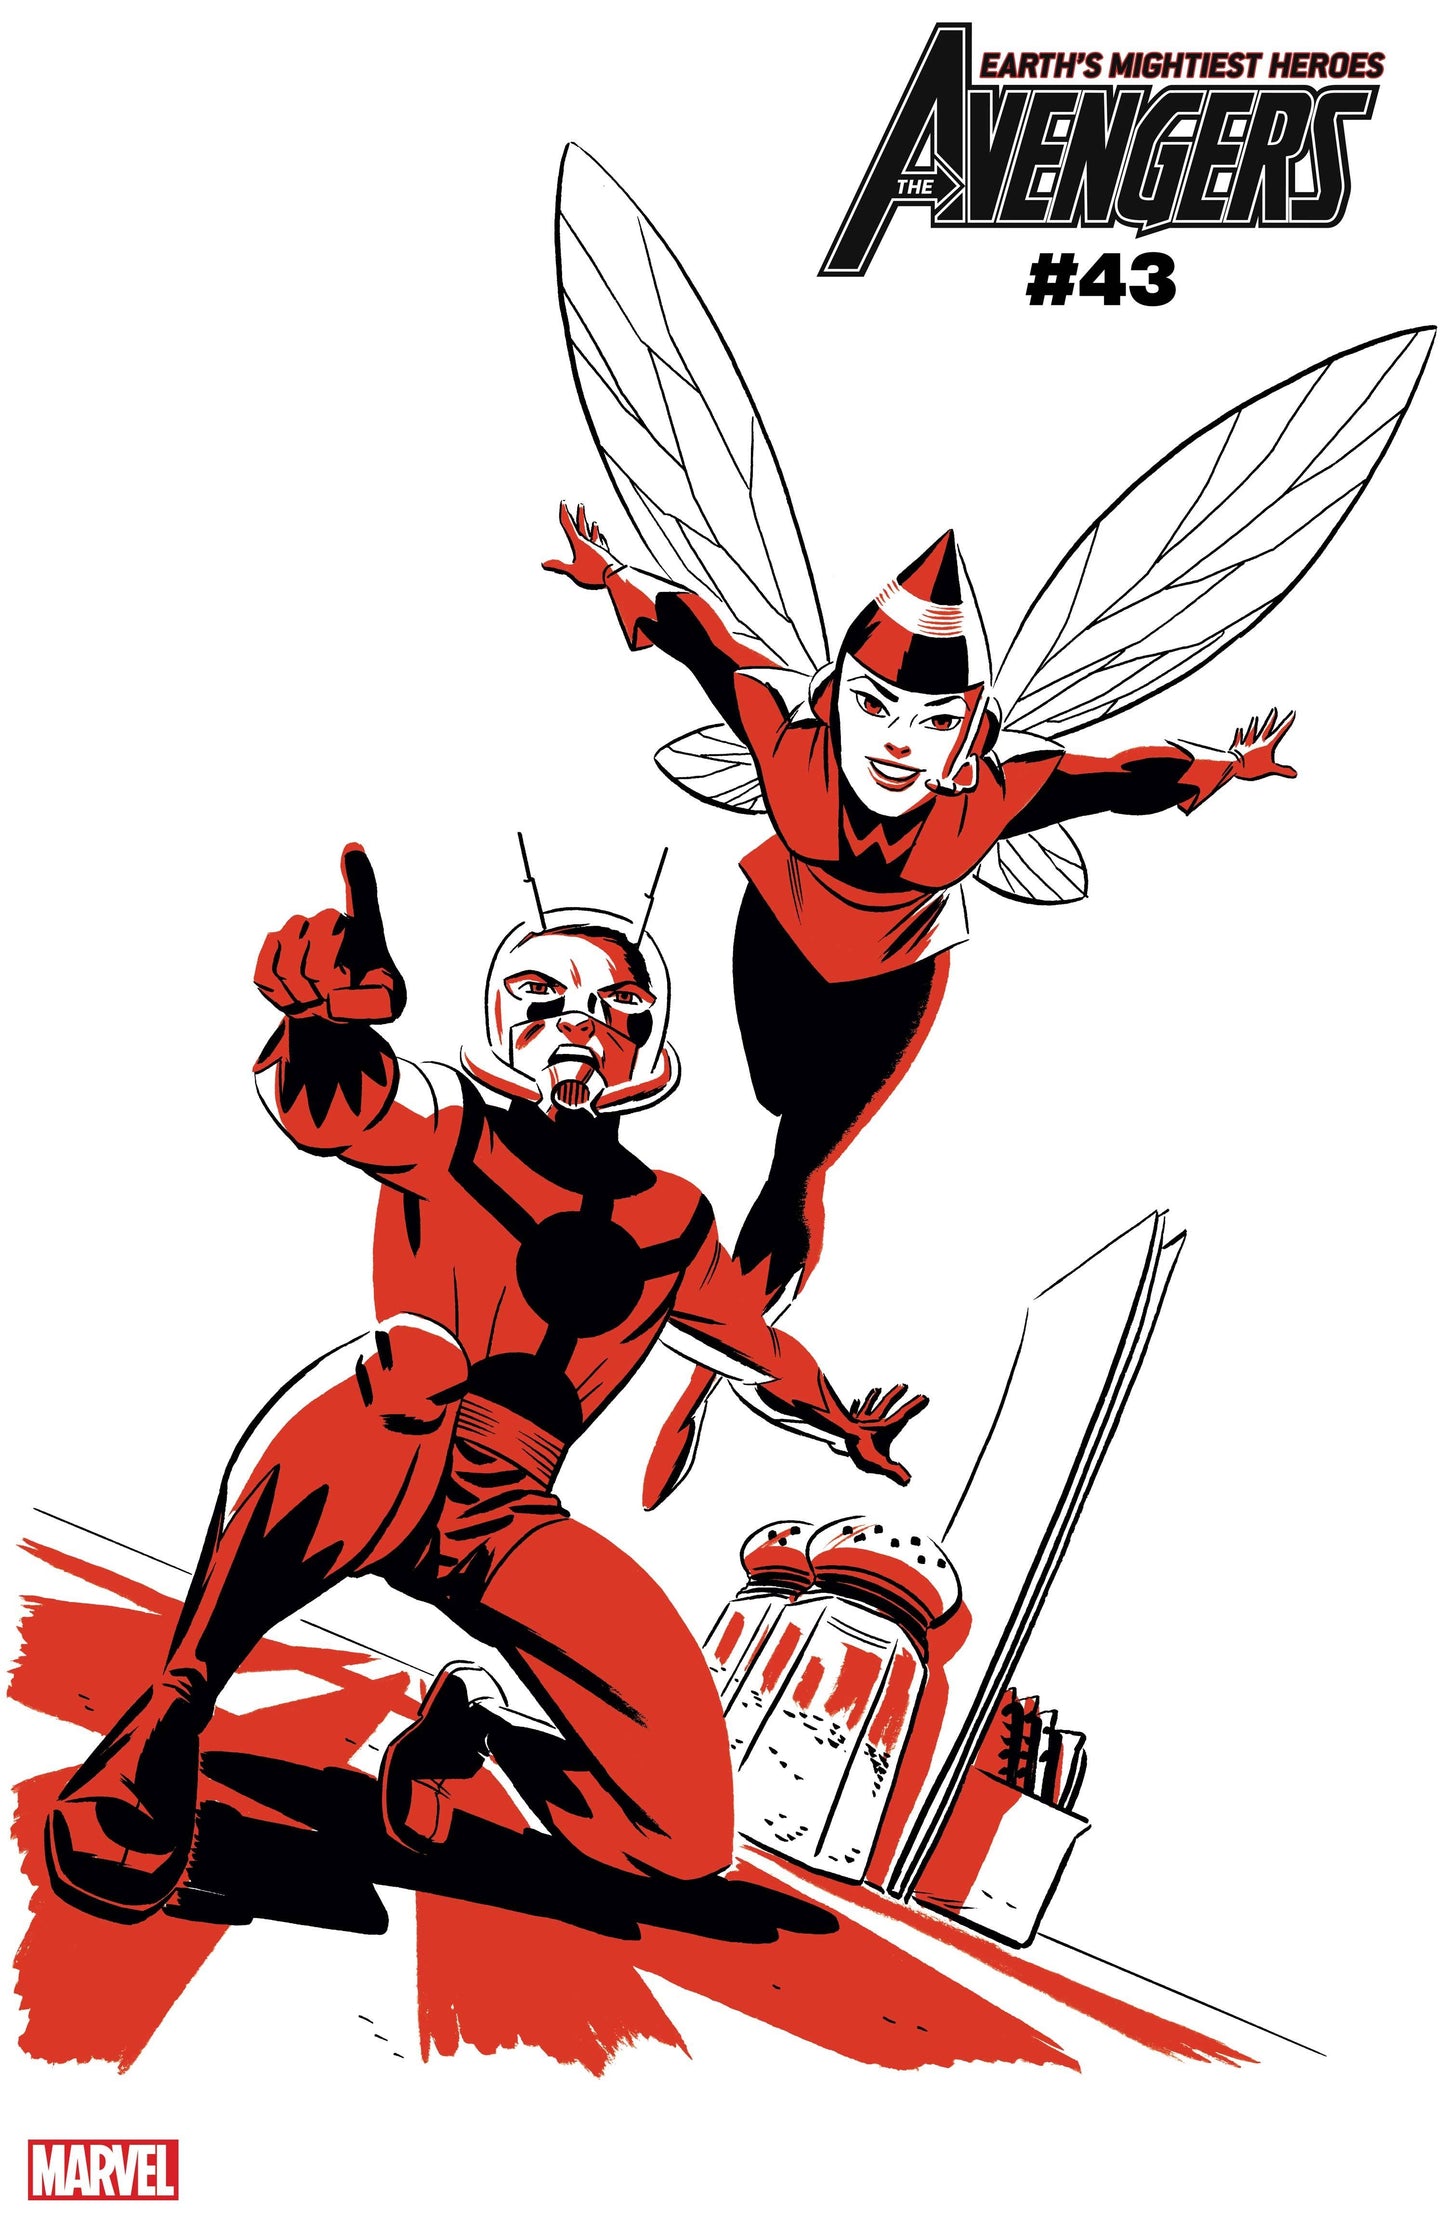 AVENGERS #43 ANT-MAN AND WASP TWO-TONE VARIANT 2021